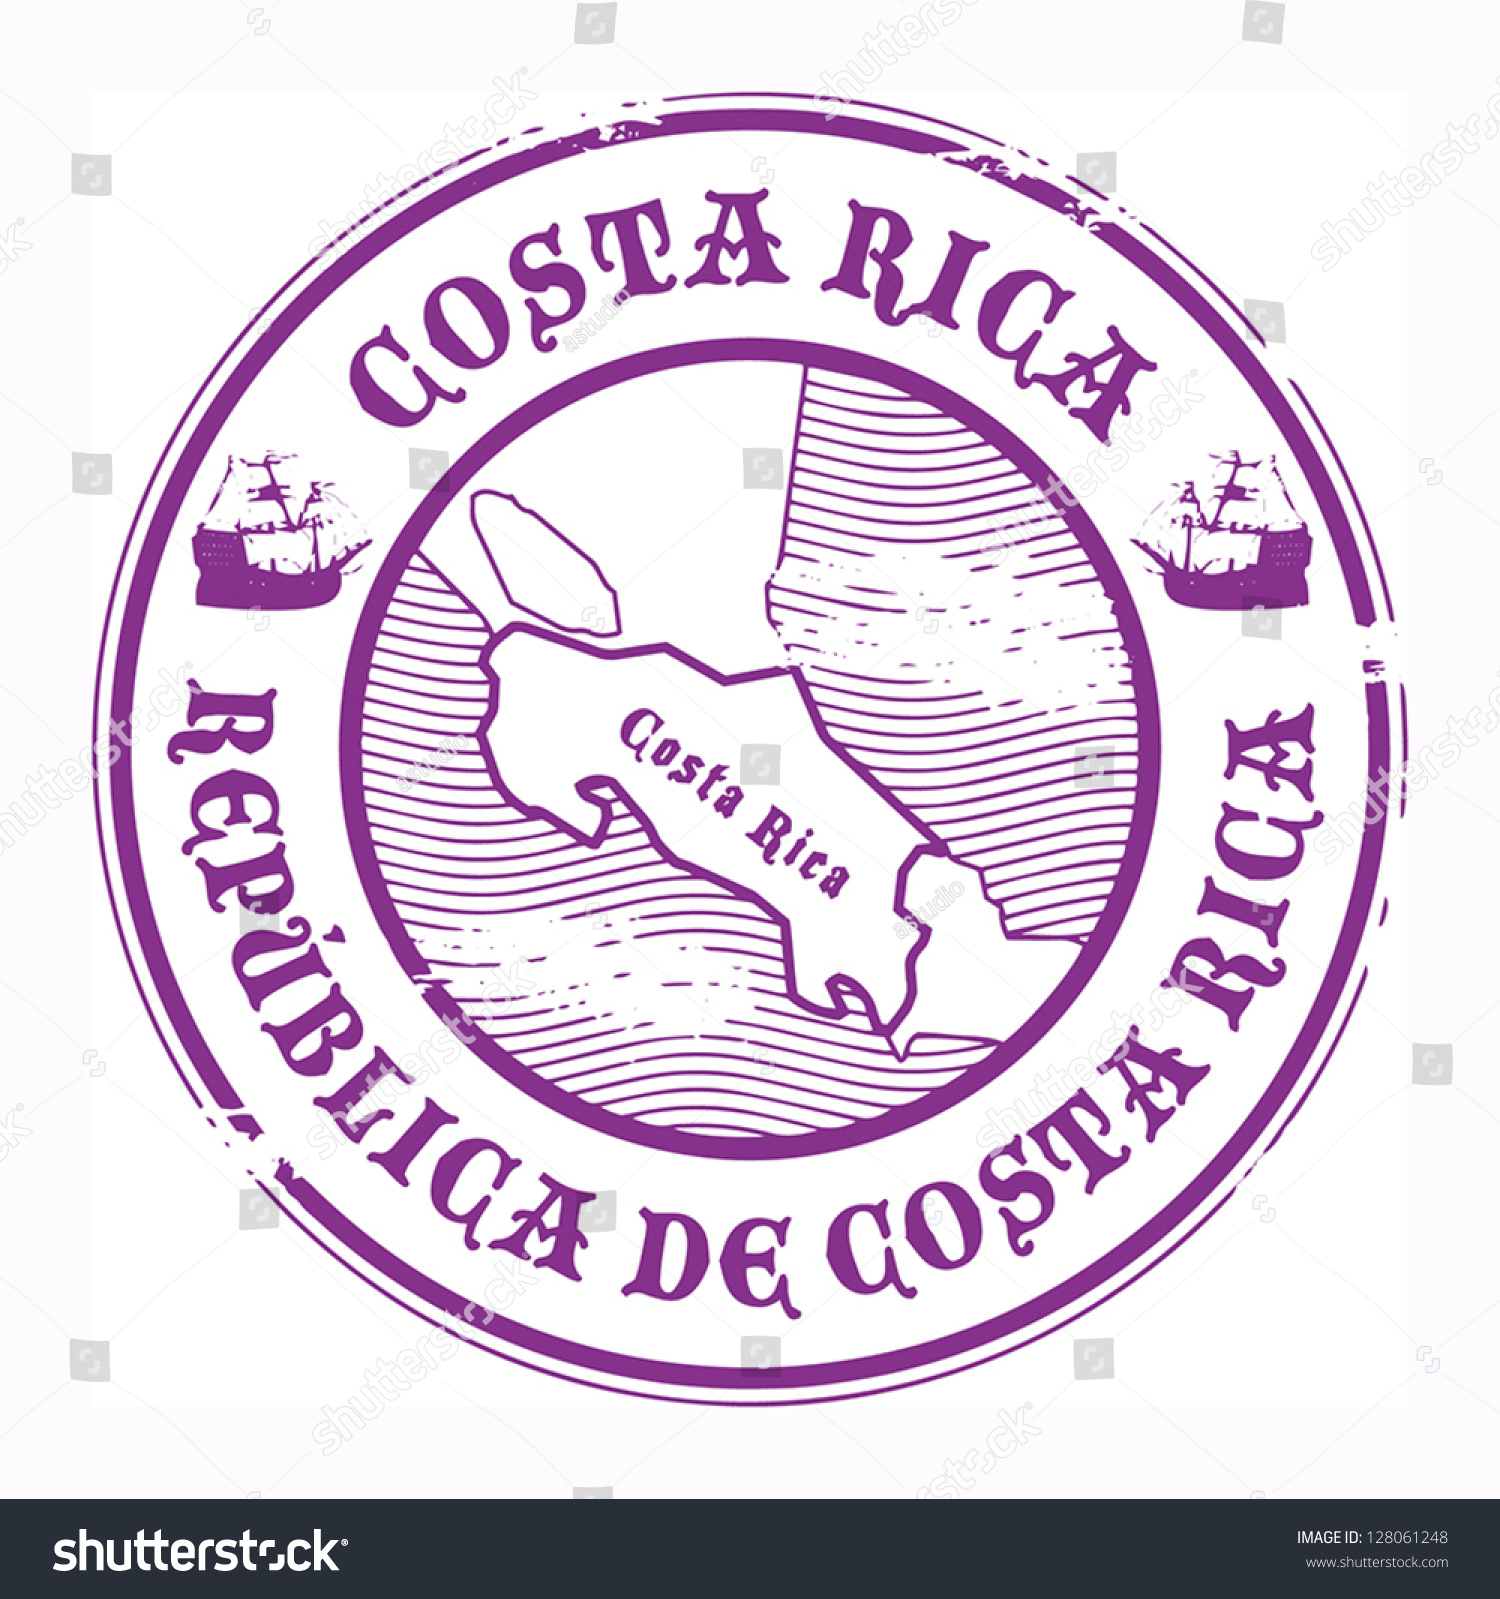 clipart map of costa rica - photo #9